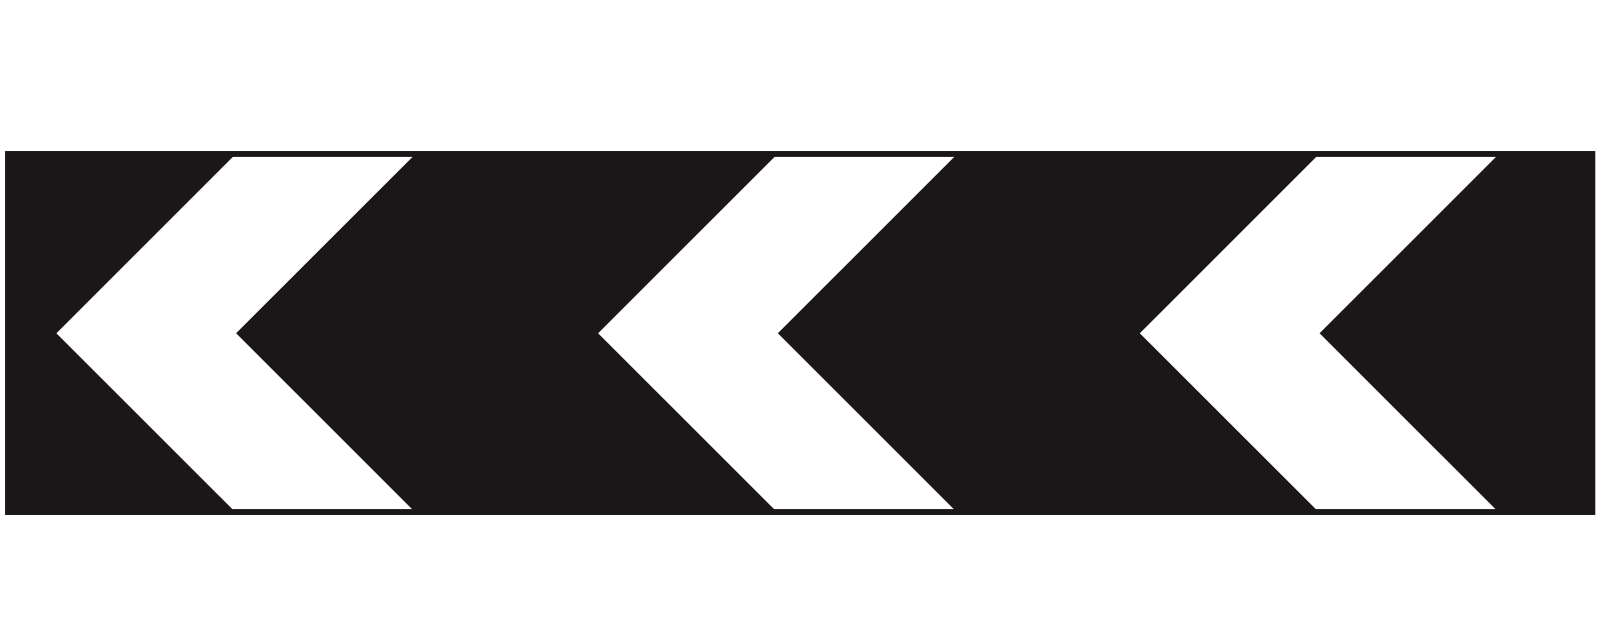 Sharp deviation to the left (right if chevrons are reversed) Road